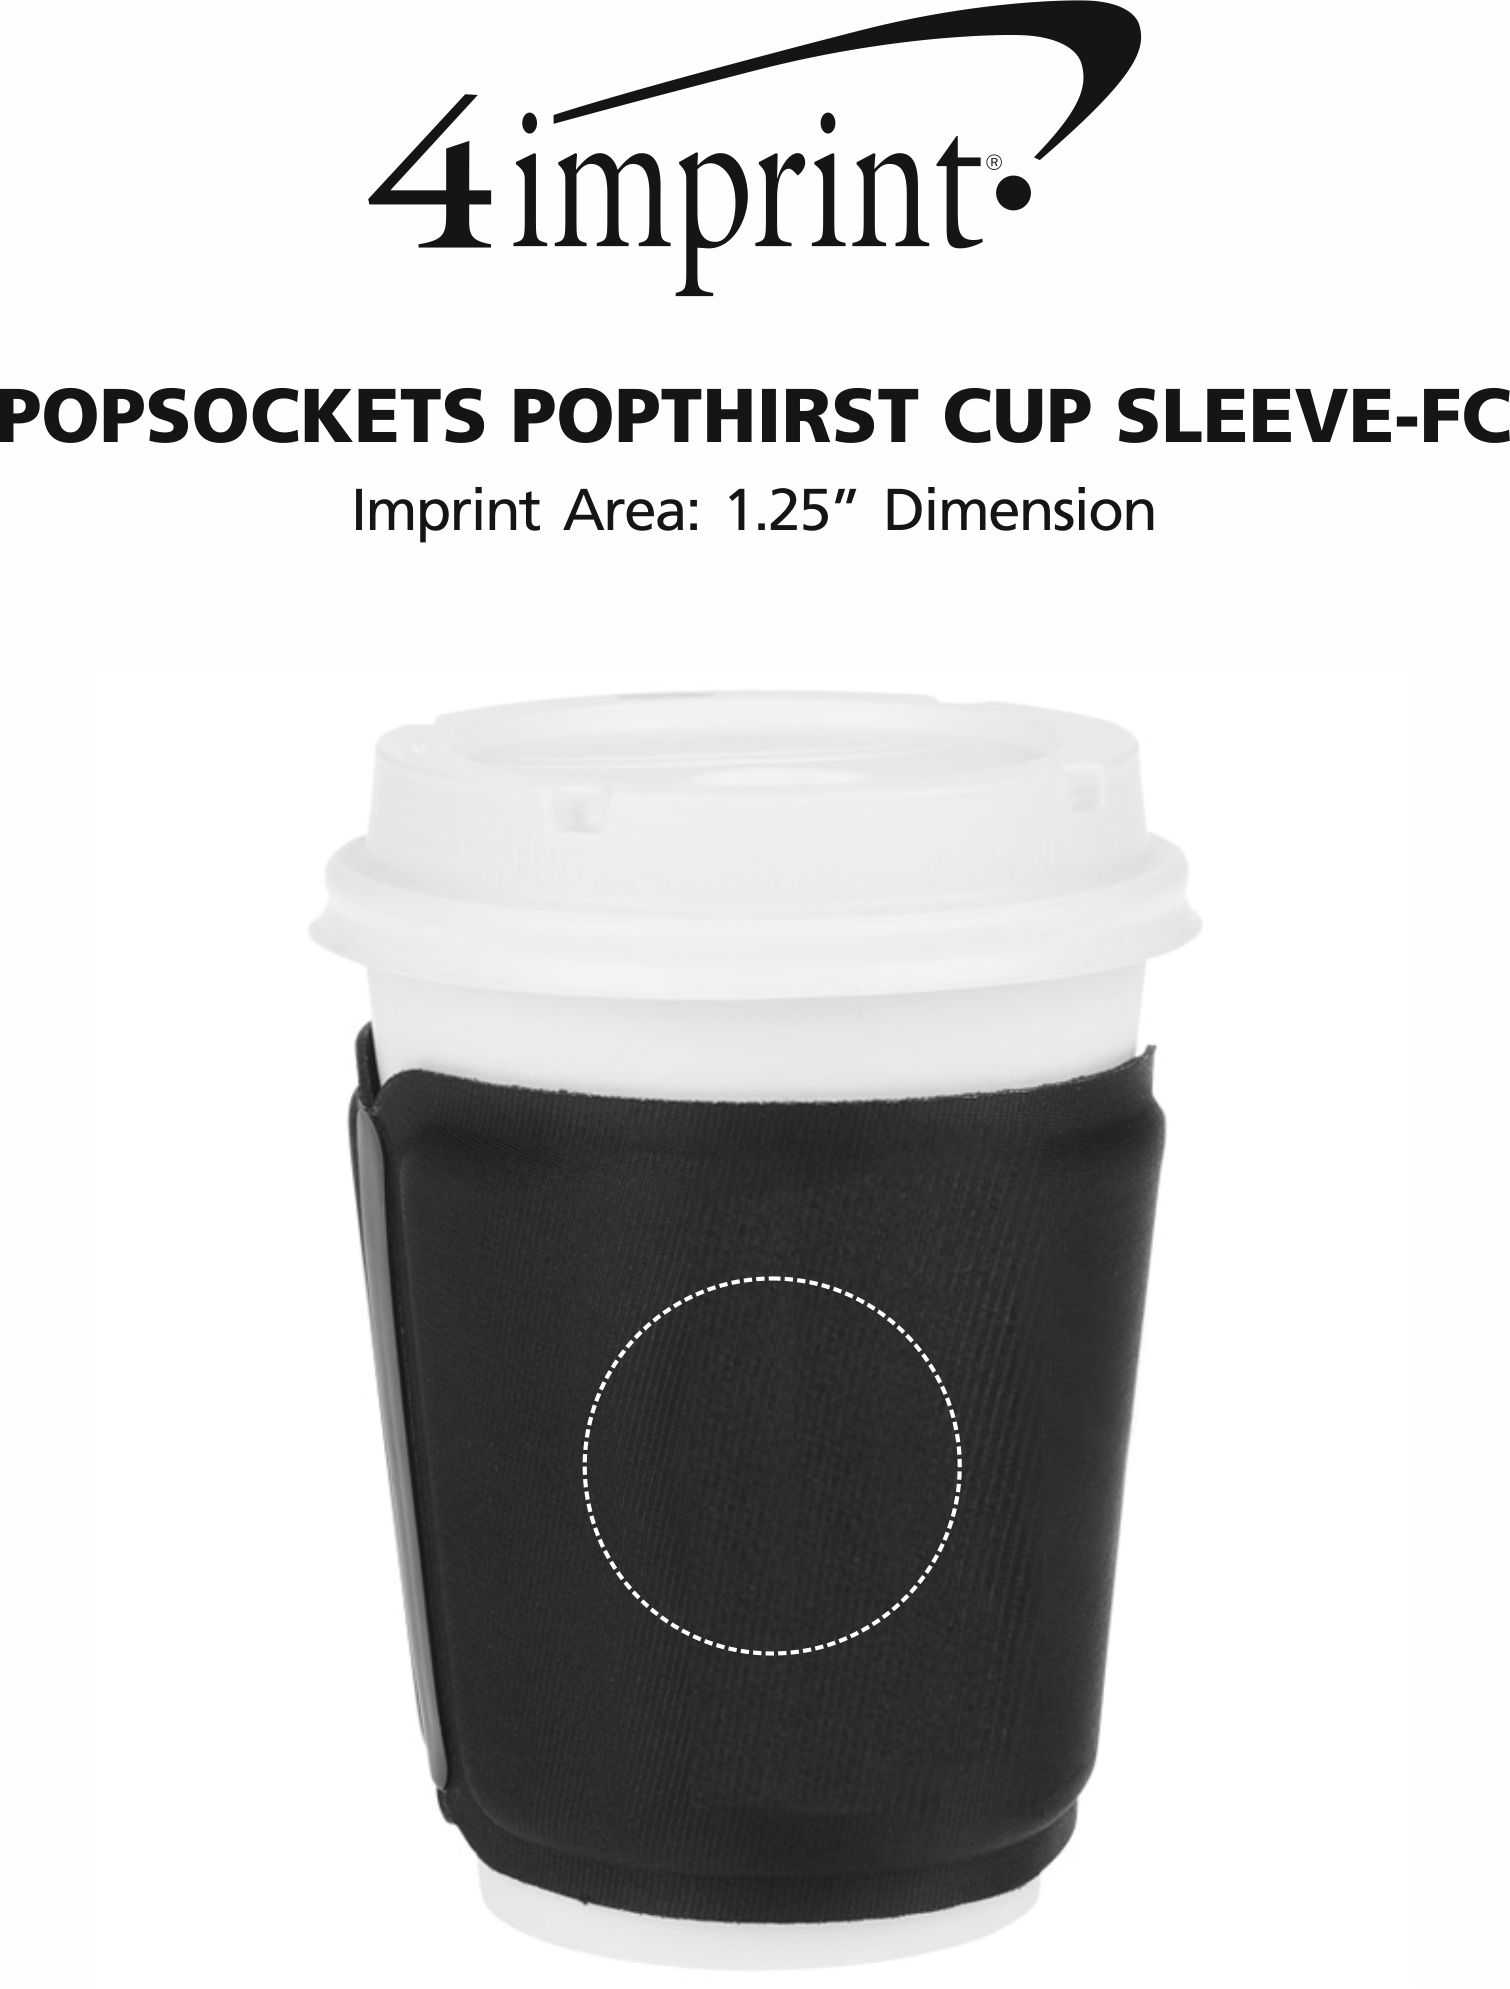 Imprint Area of PopSockets PopThirst Cup Sleeve - Full Color